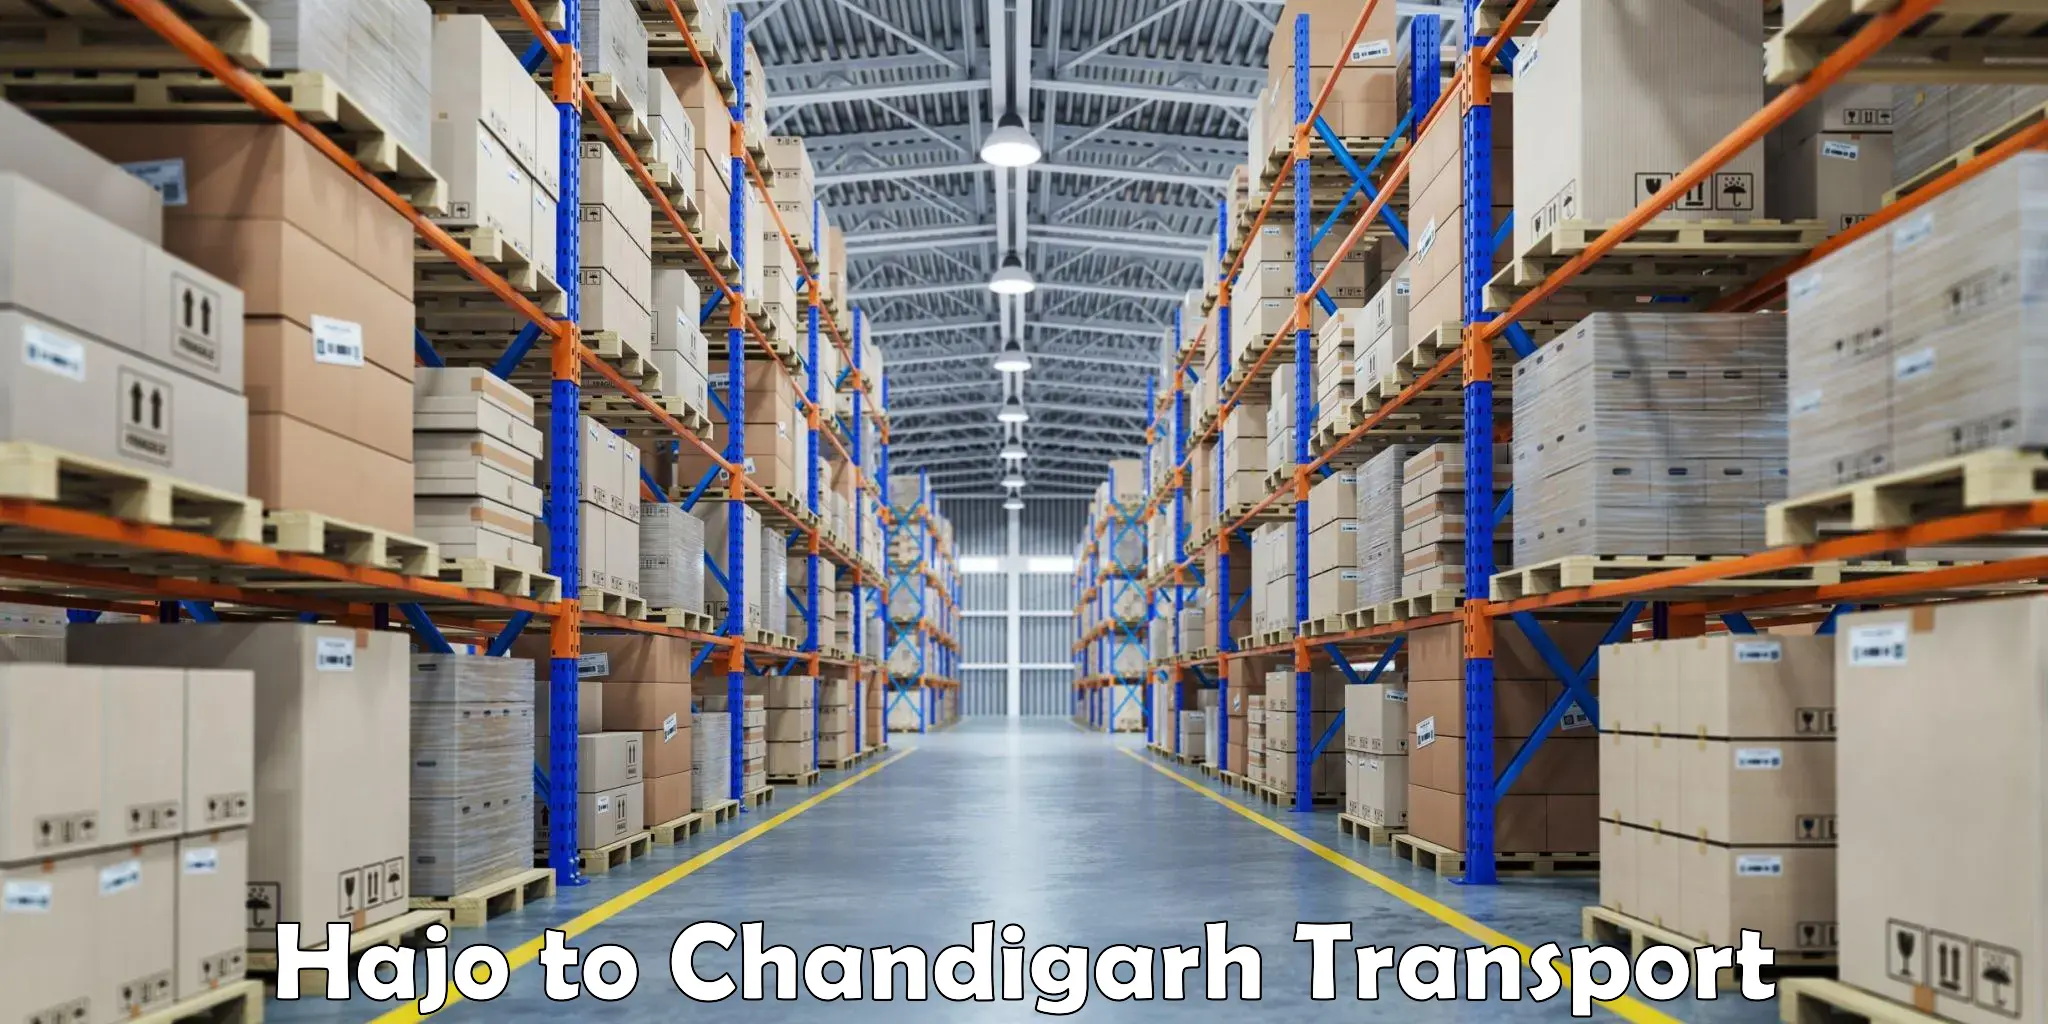 Container transport service Hajo to Chandigarh